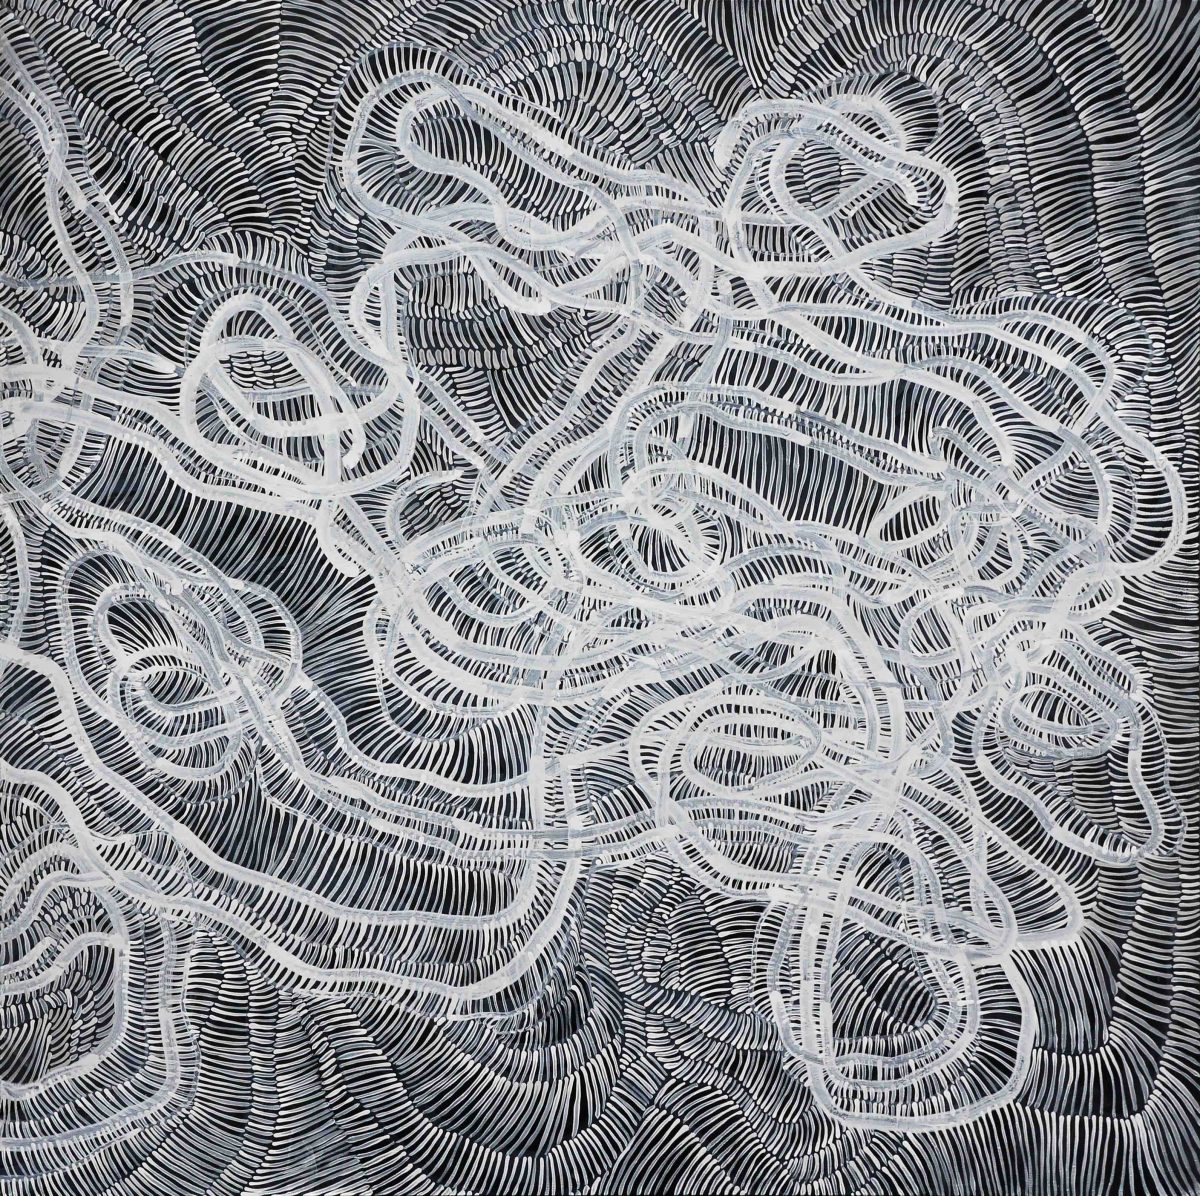 Painting with curls, horizontal 